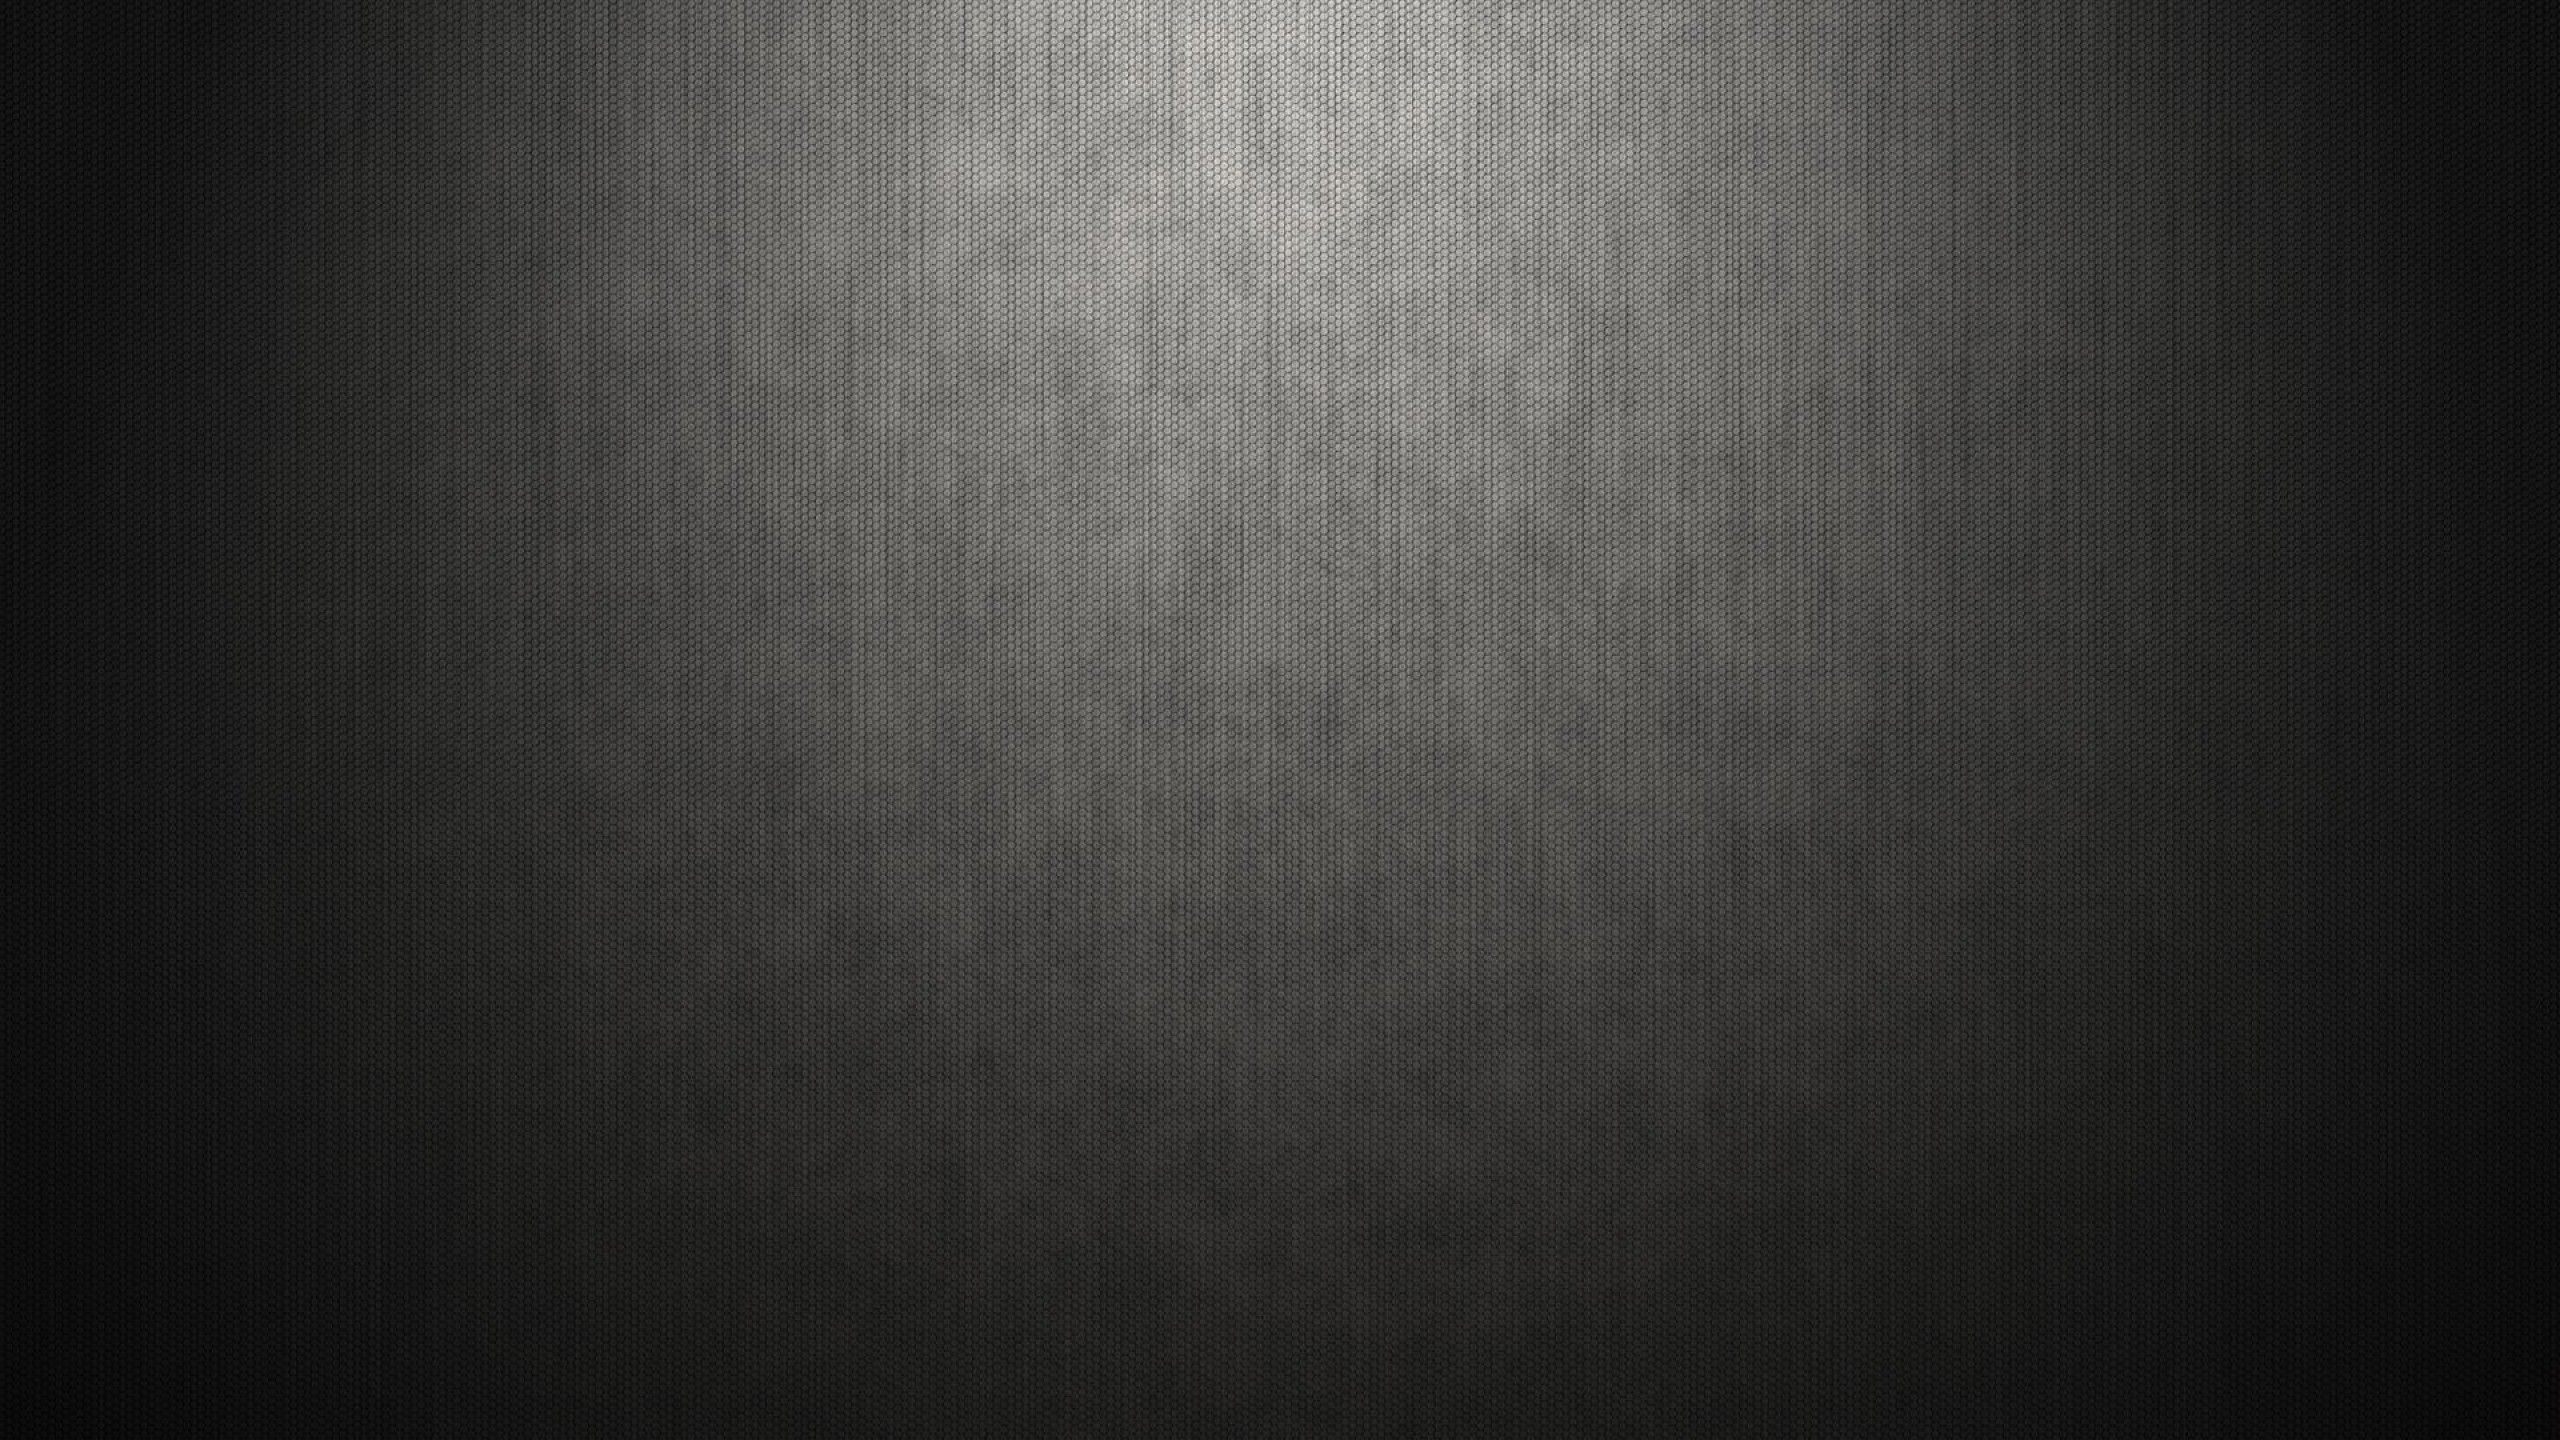 Download 2560x1440 Texture, Gray, Pattern, Gradient Wallpaper for iMac 27 inch